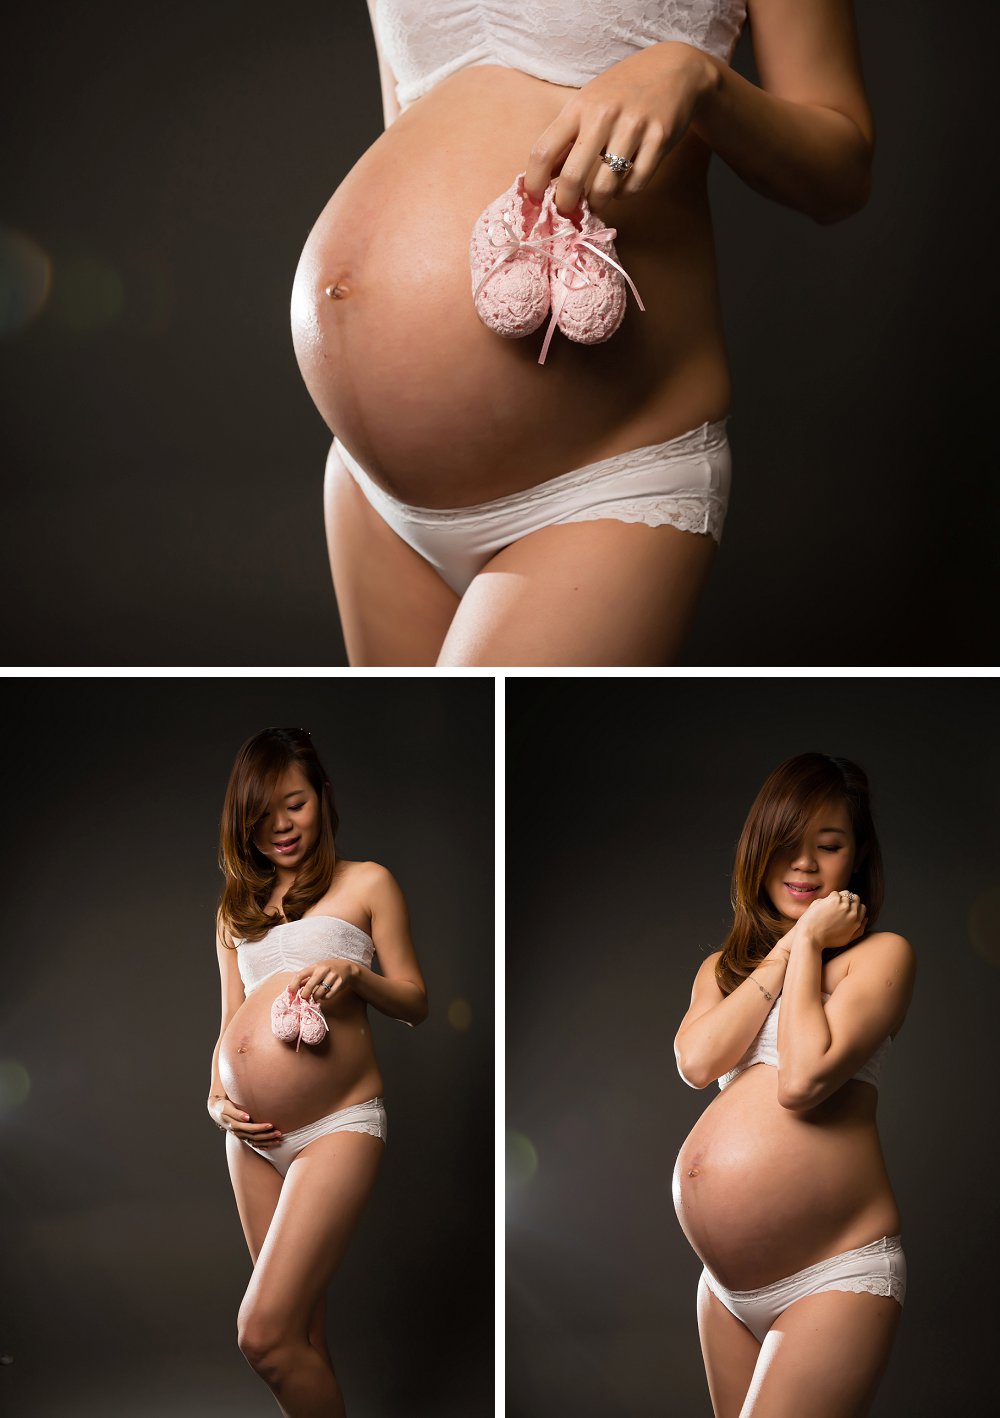 Pregnant Asian woman in lingerie in Sydney studio holding baby shoes